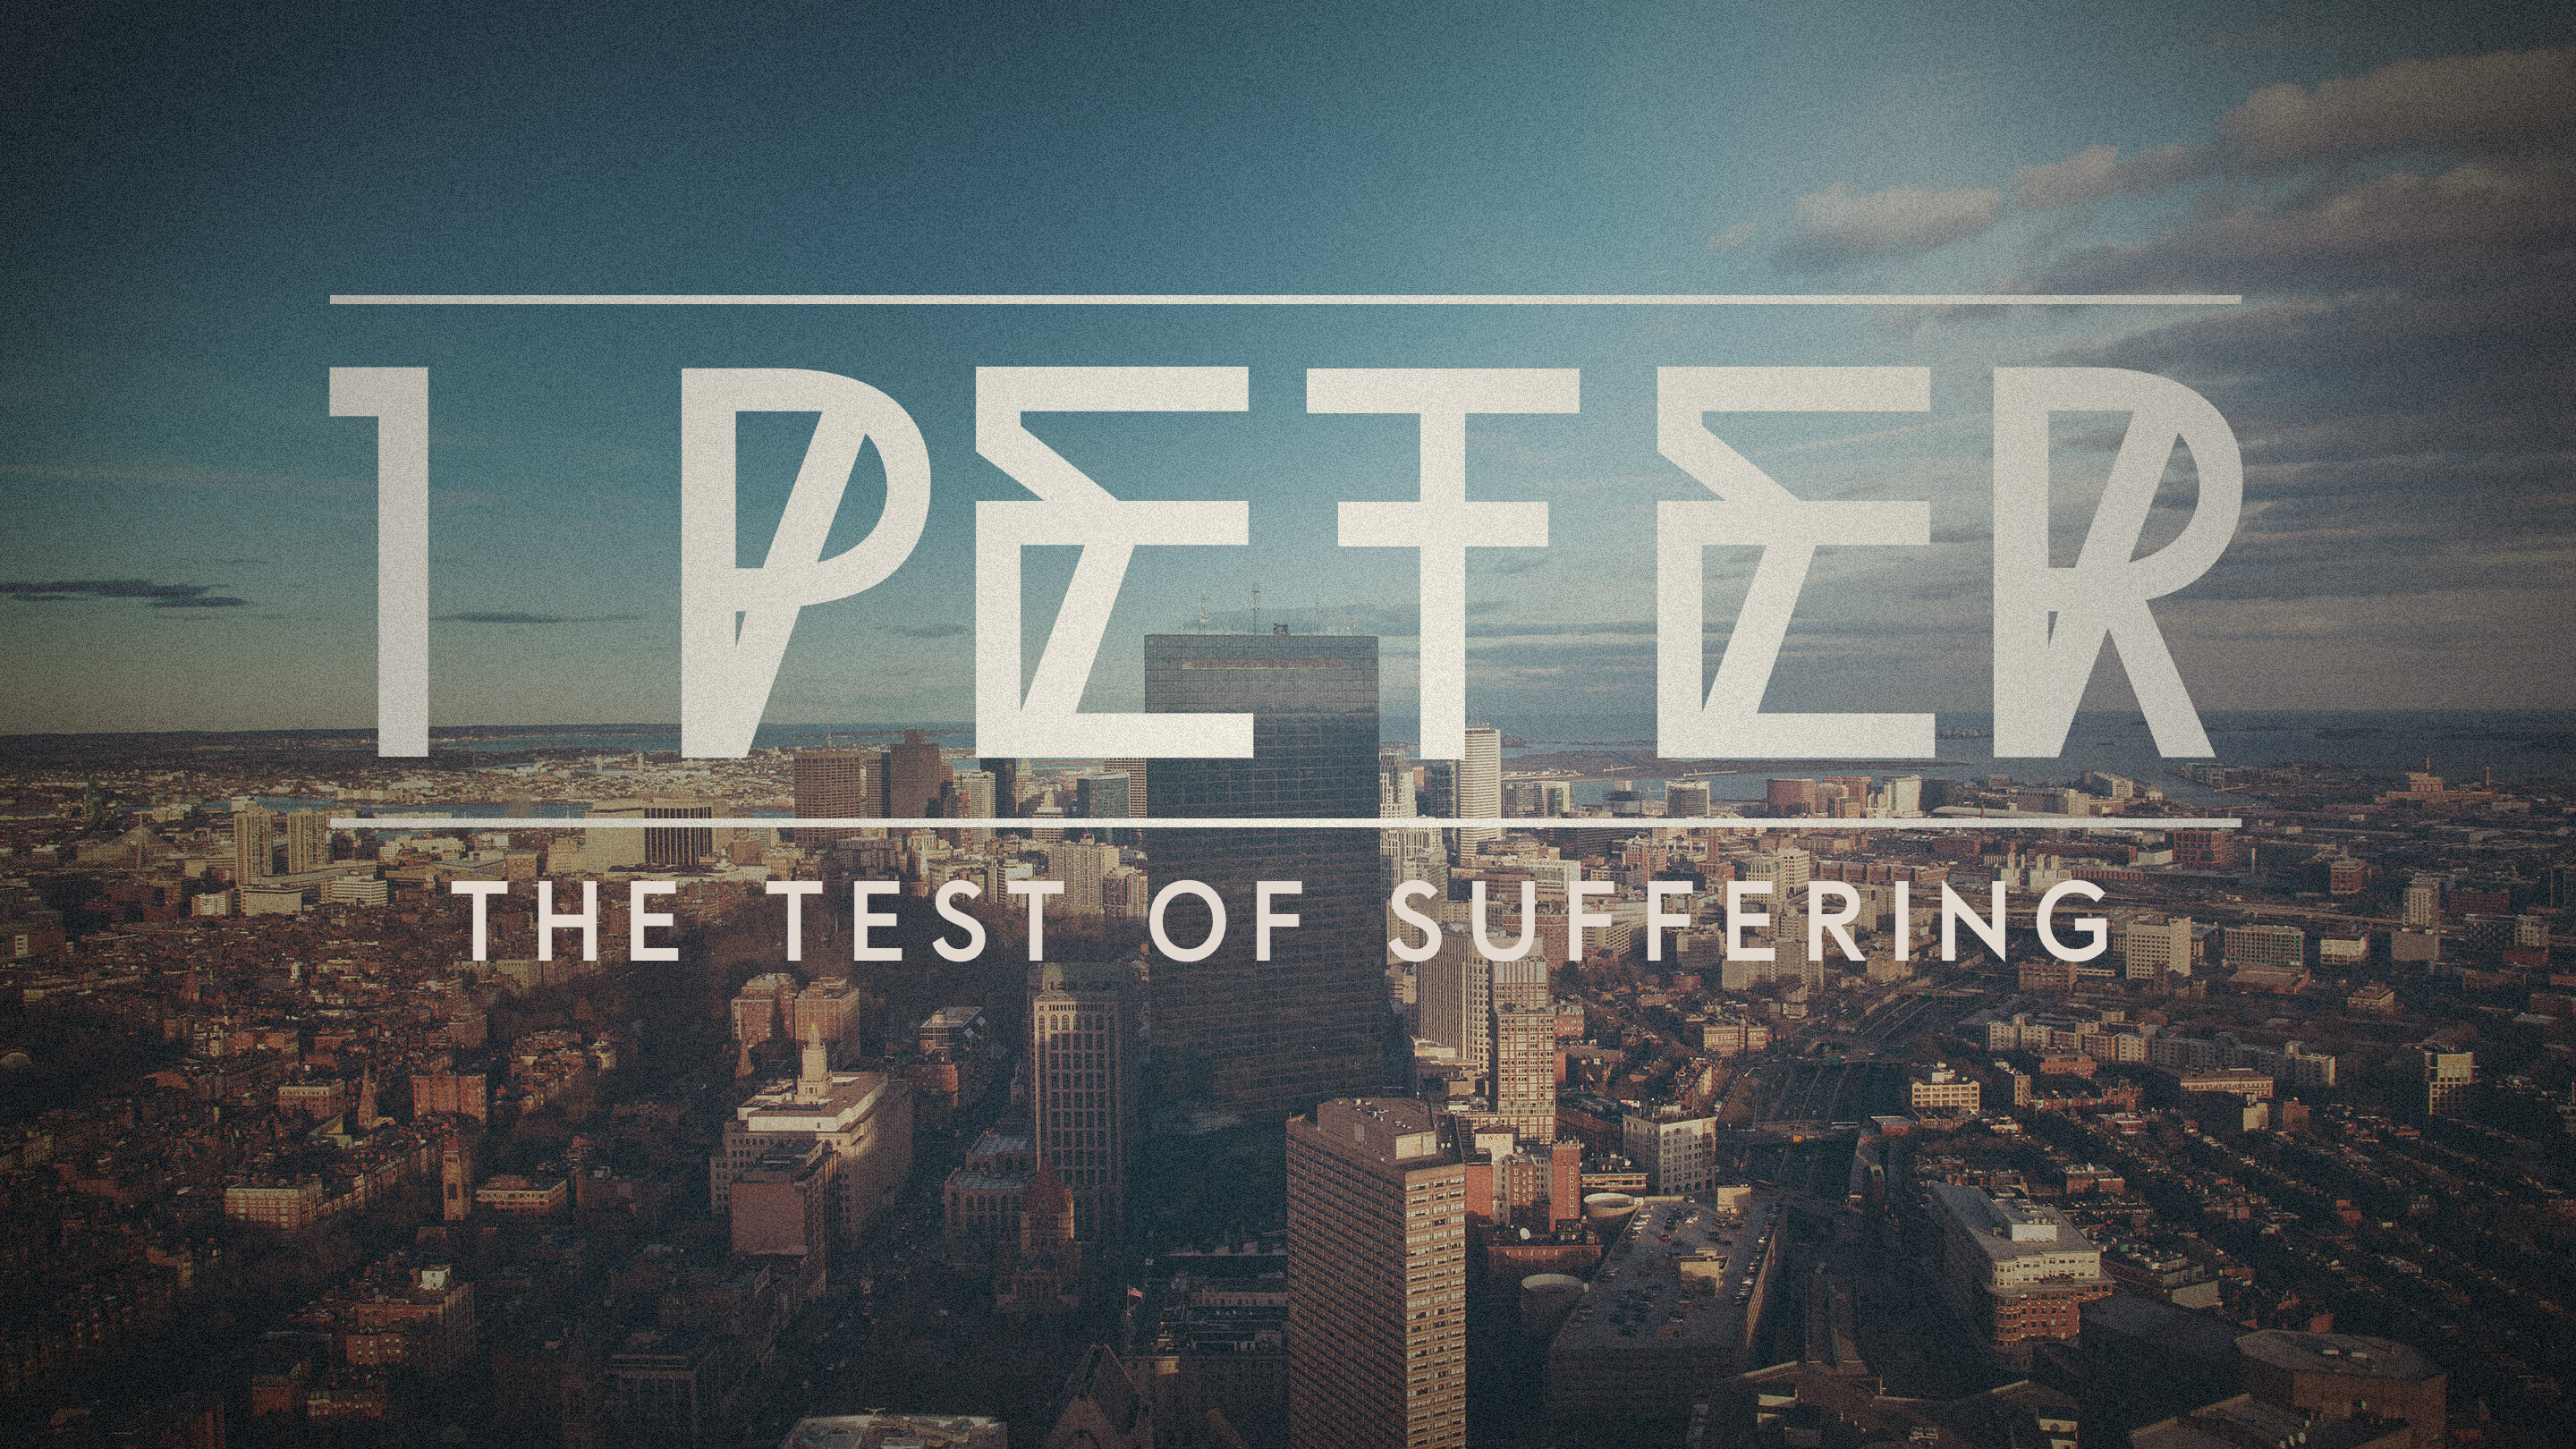 The Test of Suffering